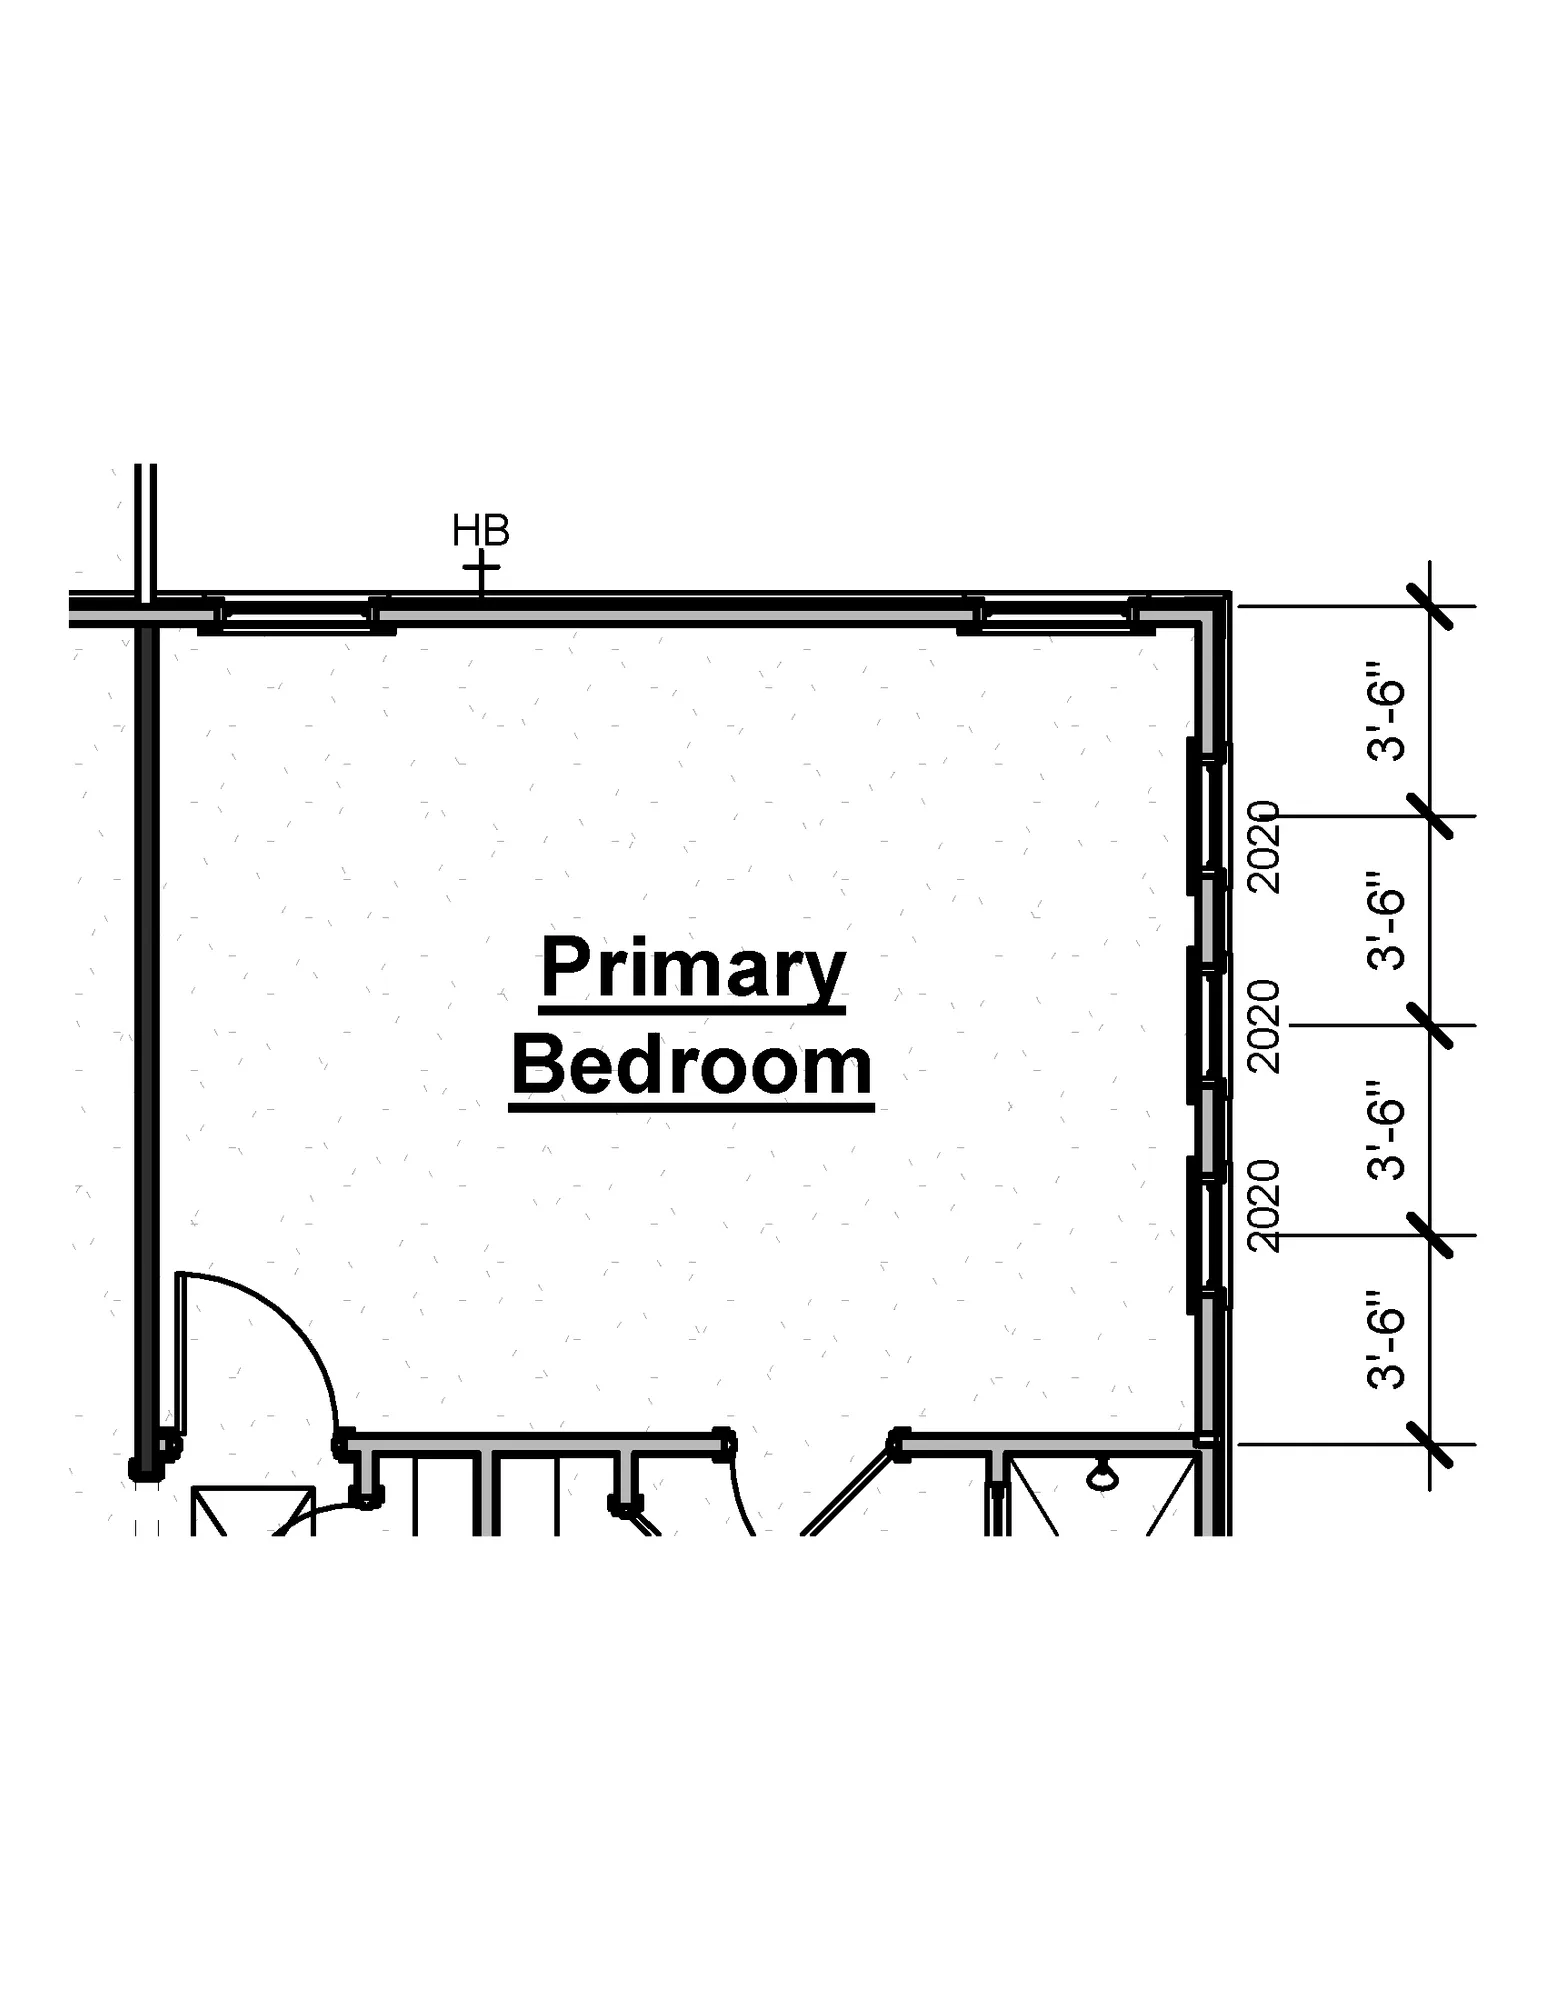 Primary Bedroom - Privacy Windows - undefined